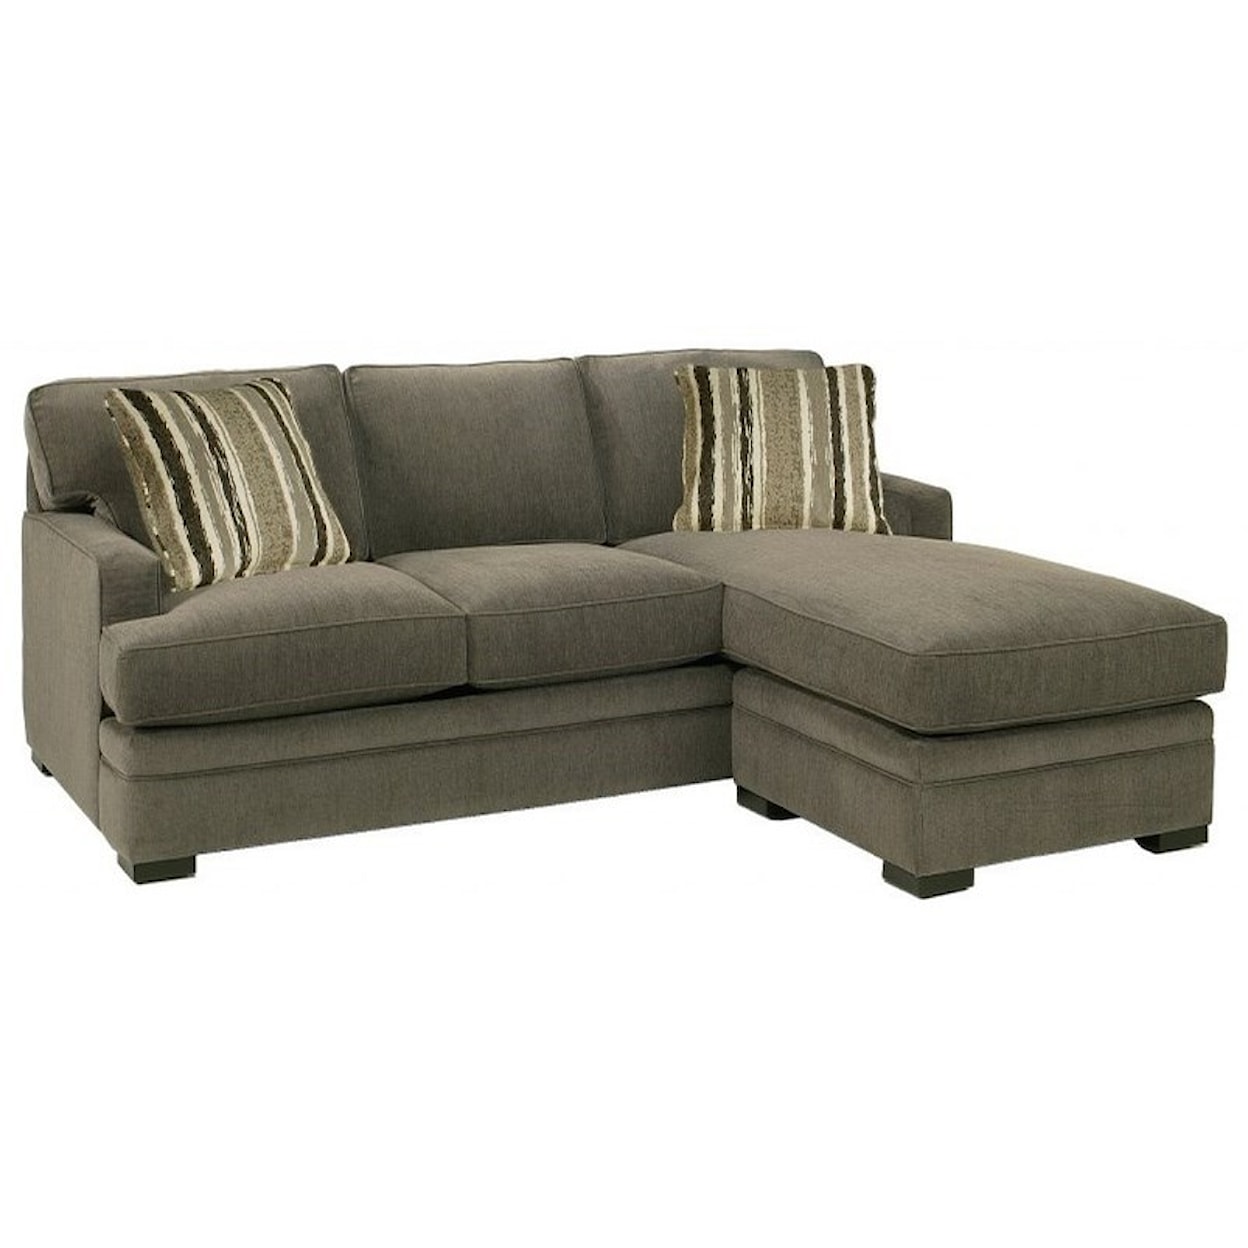 Jonathan Louis Choices - Neptune Sofa with Chaise